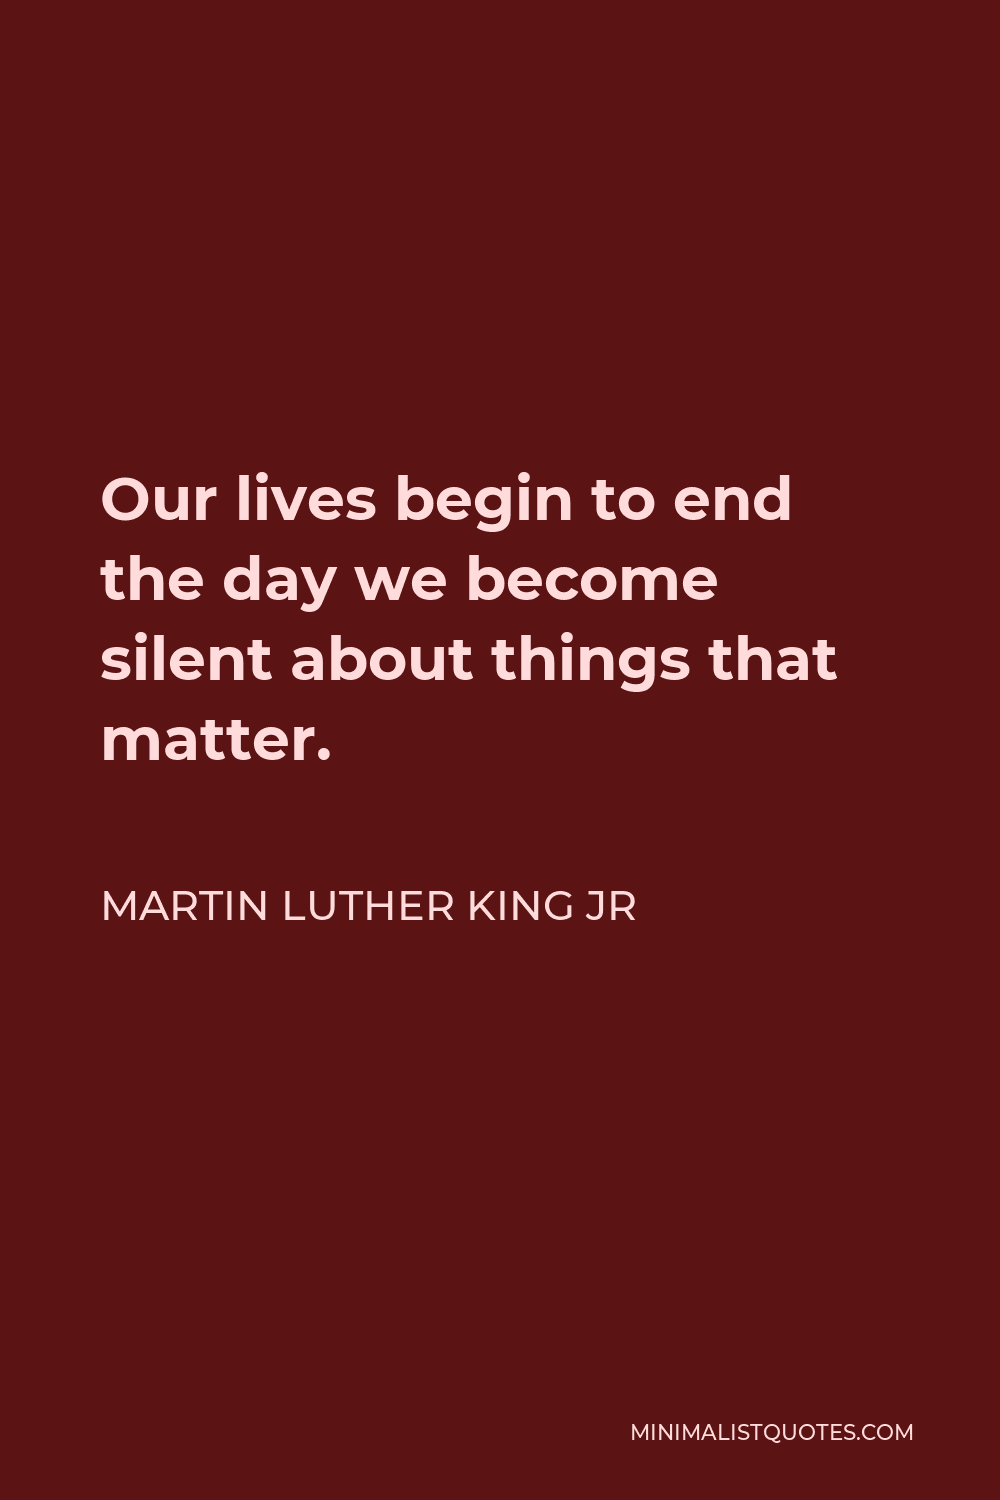 Martin Luther King Jr Quote - Our lives begin to end the day we become silent about things that matter.